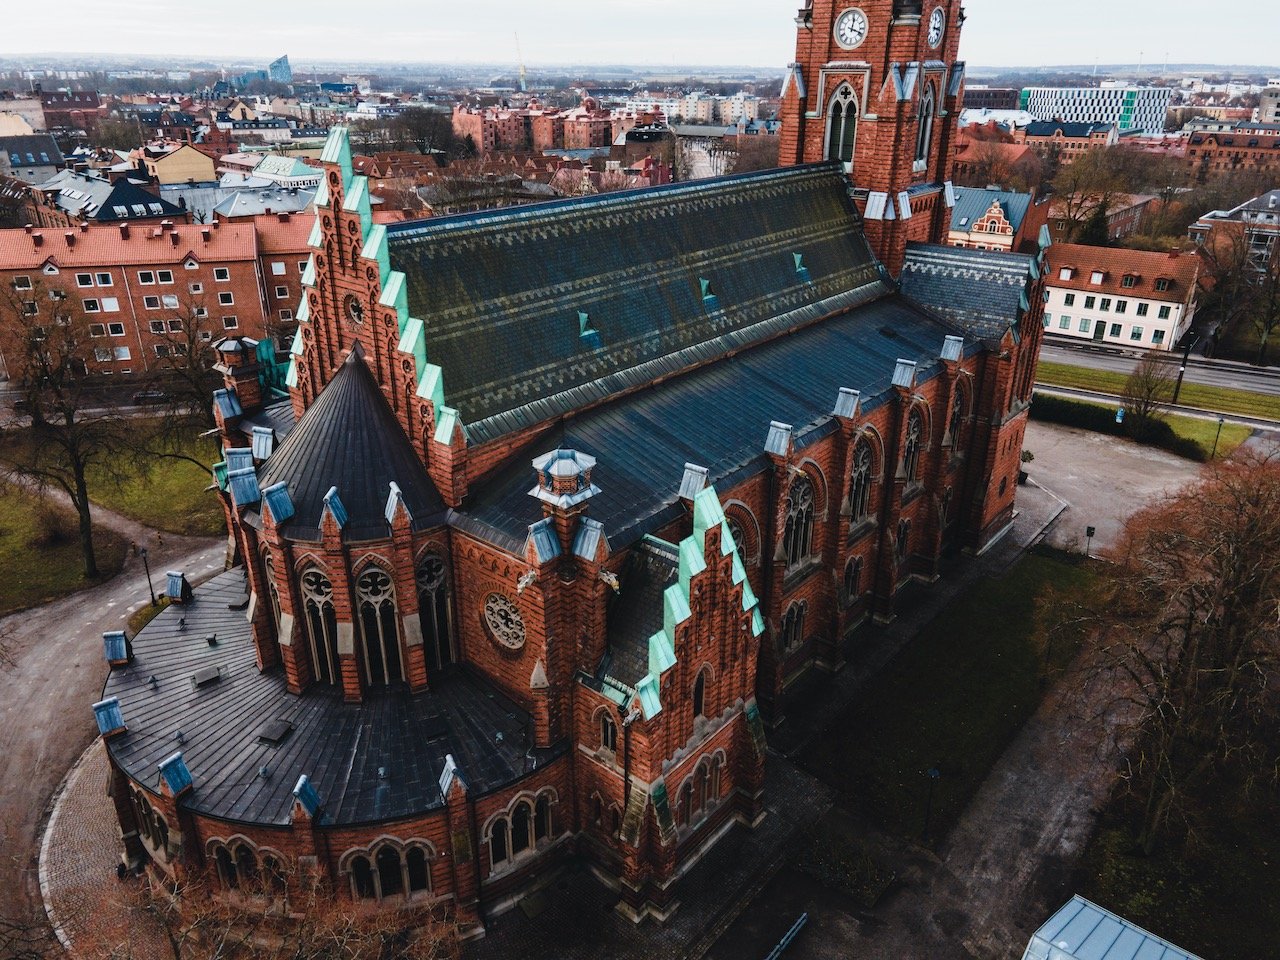   All Saints Church, Lund, Sweden (ISO 100, 4.5 mm,  f /2.8, 1/200 s)  